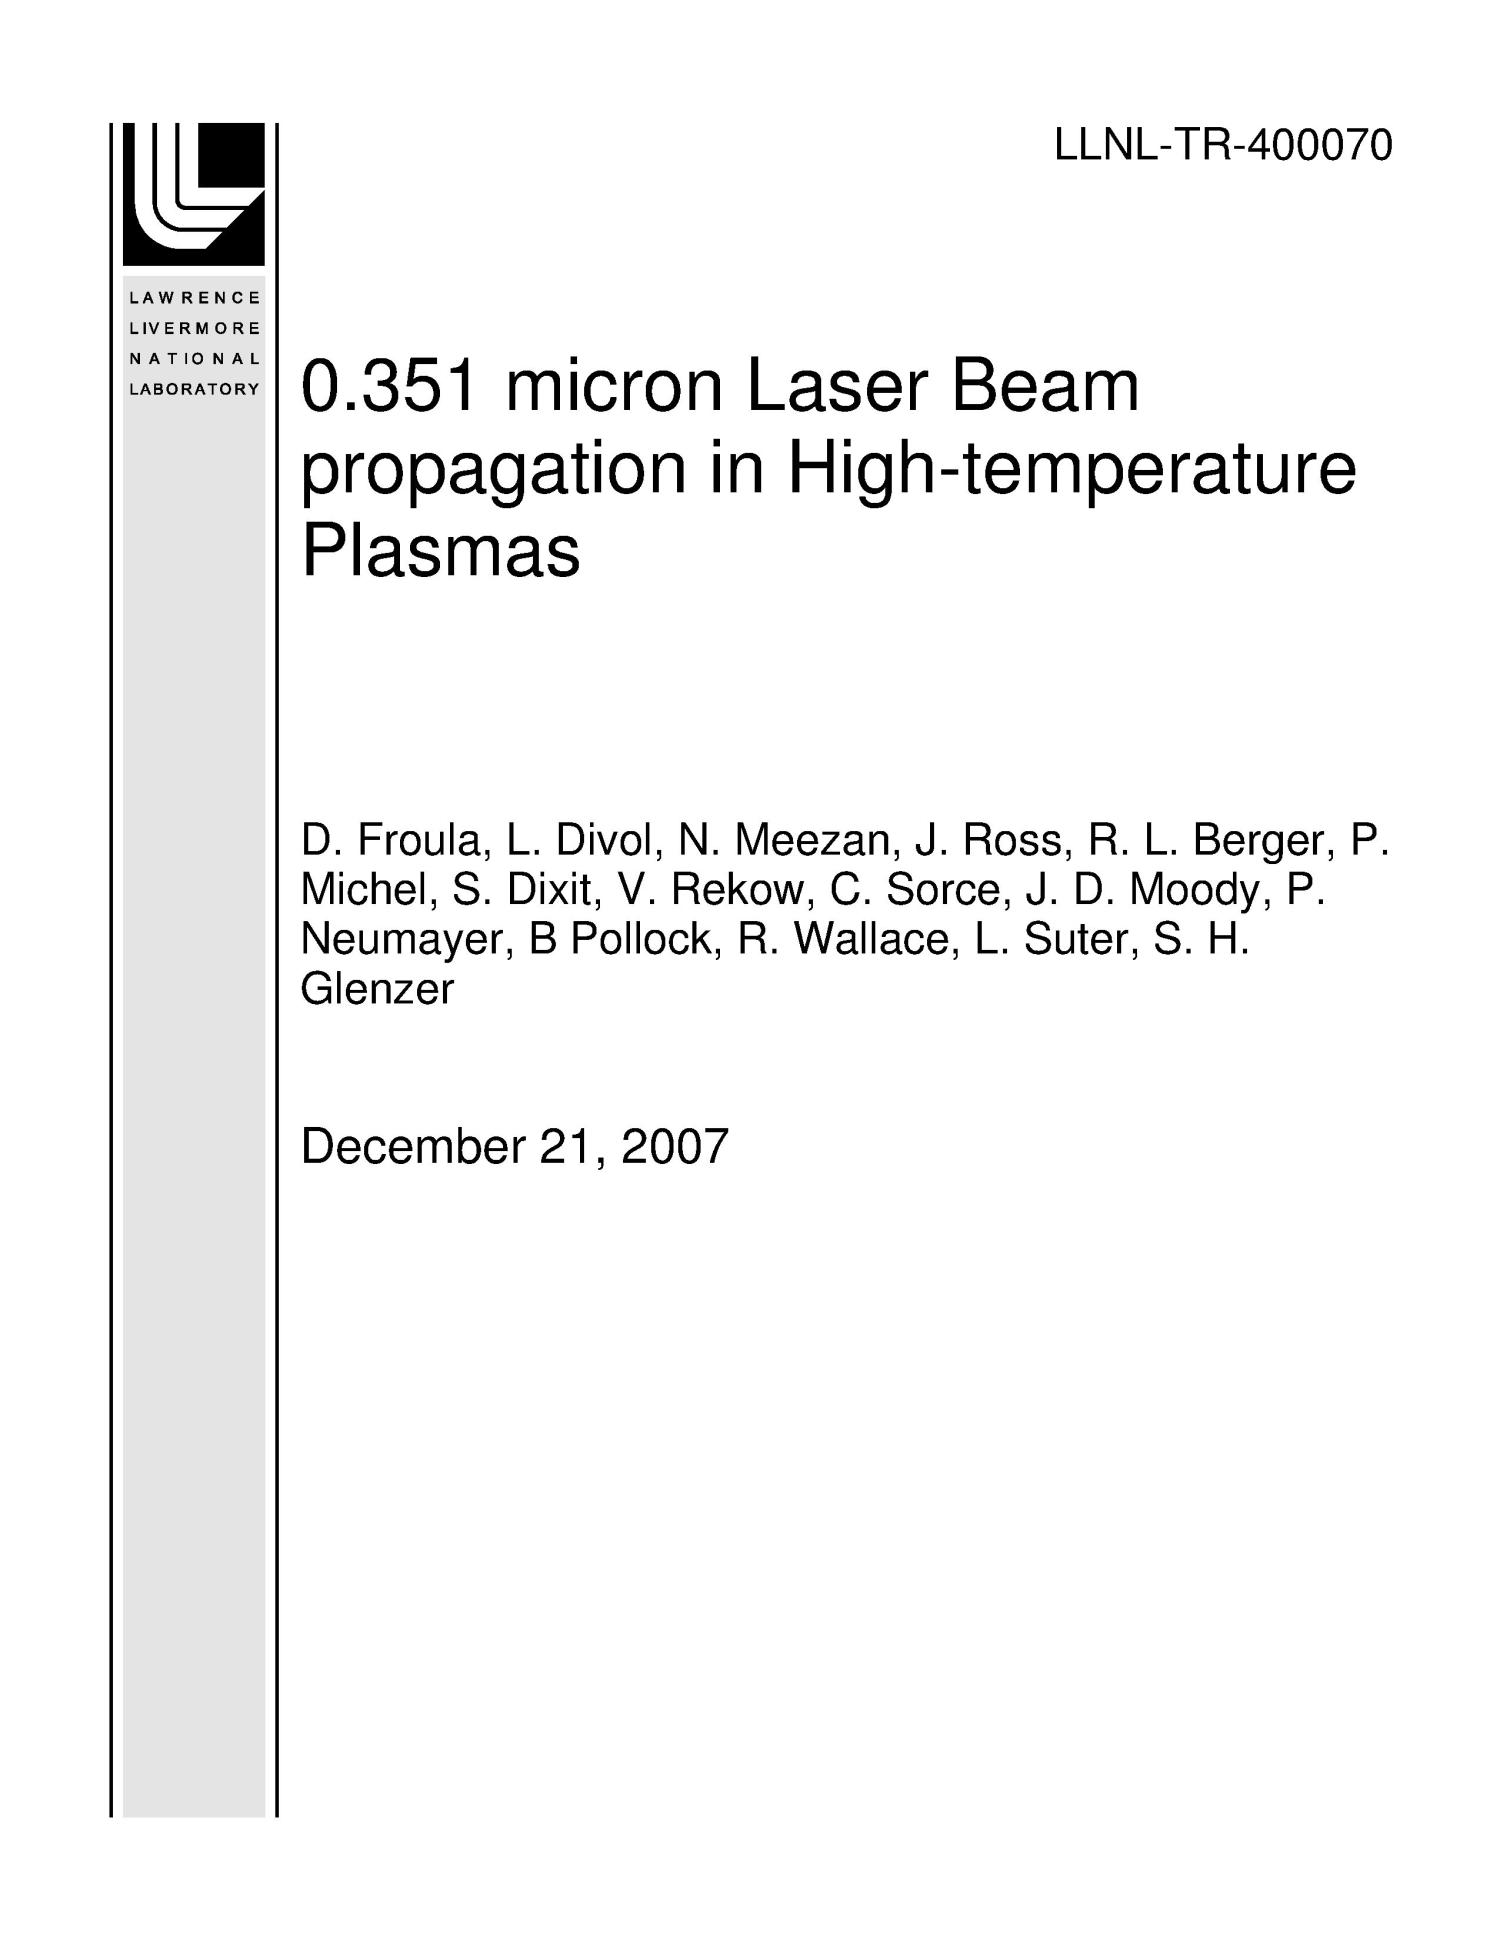 0.351 micron Laser Beam propagation in High-temperature Plasmas
                                                
                                                    [Sequence #]: 1 of 20
                                                